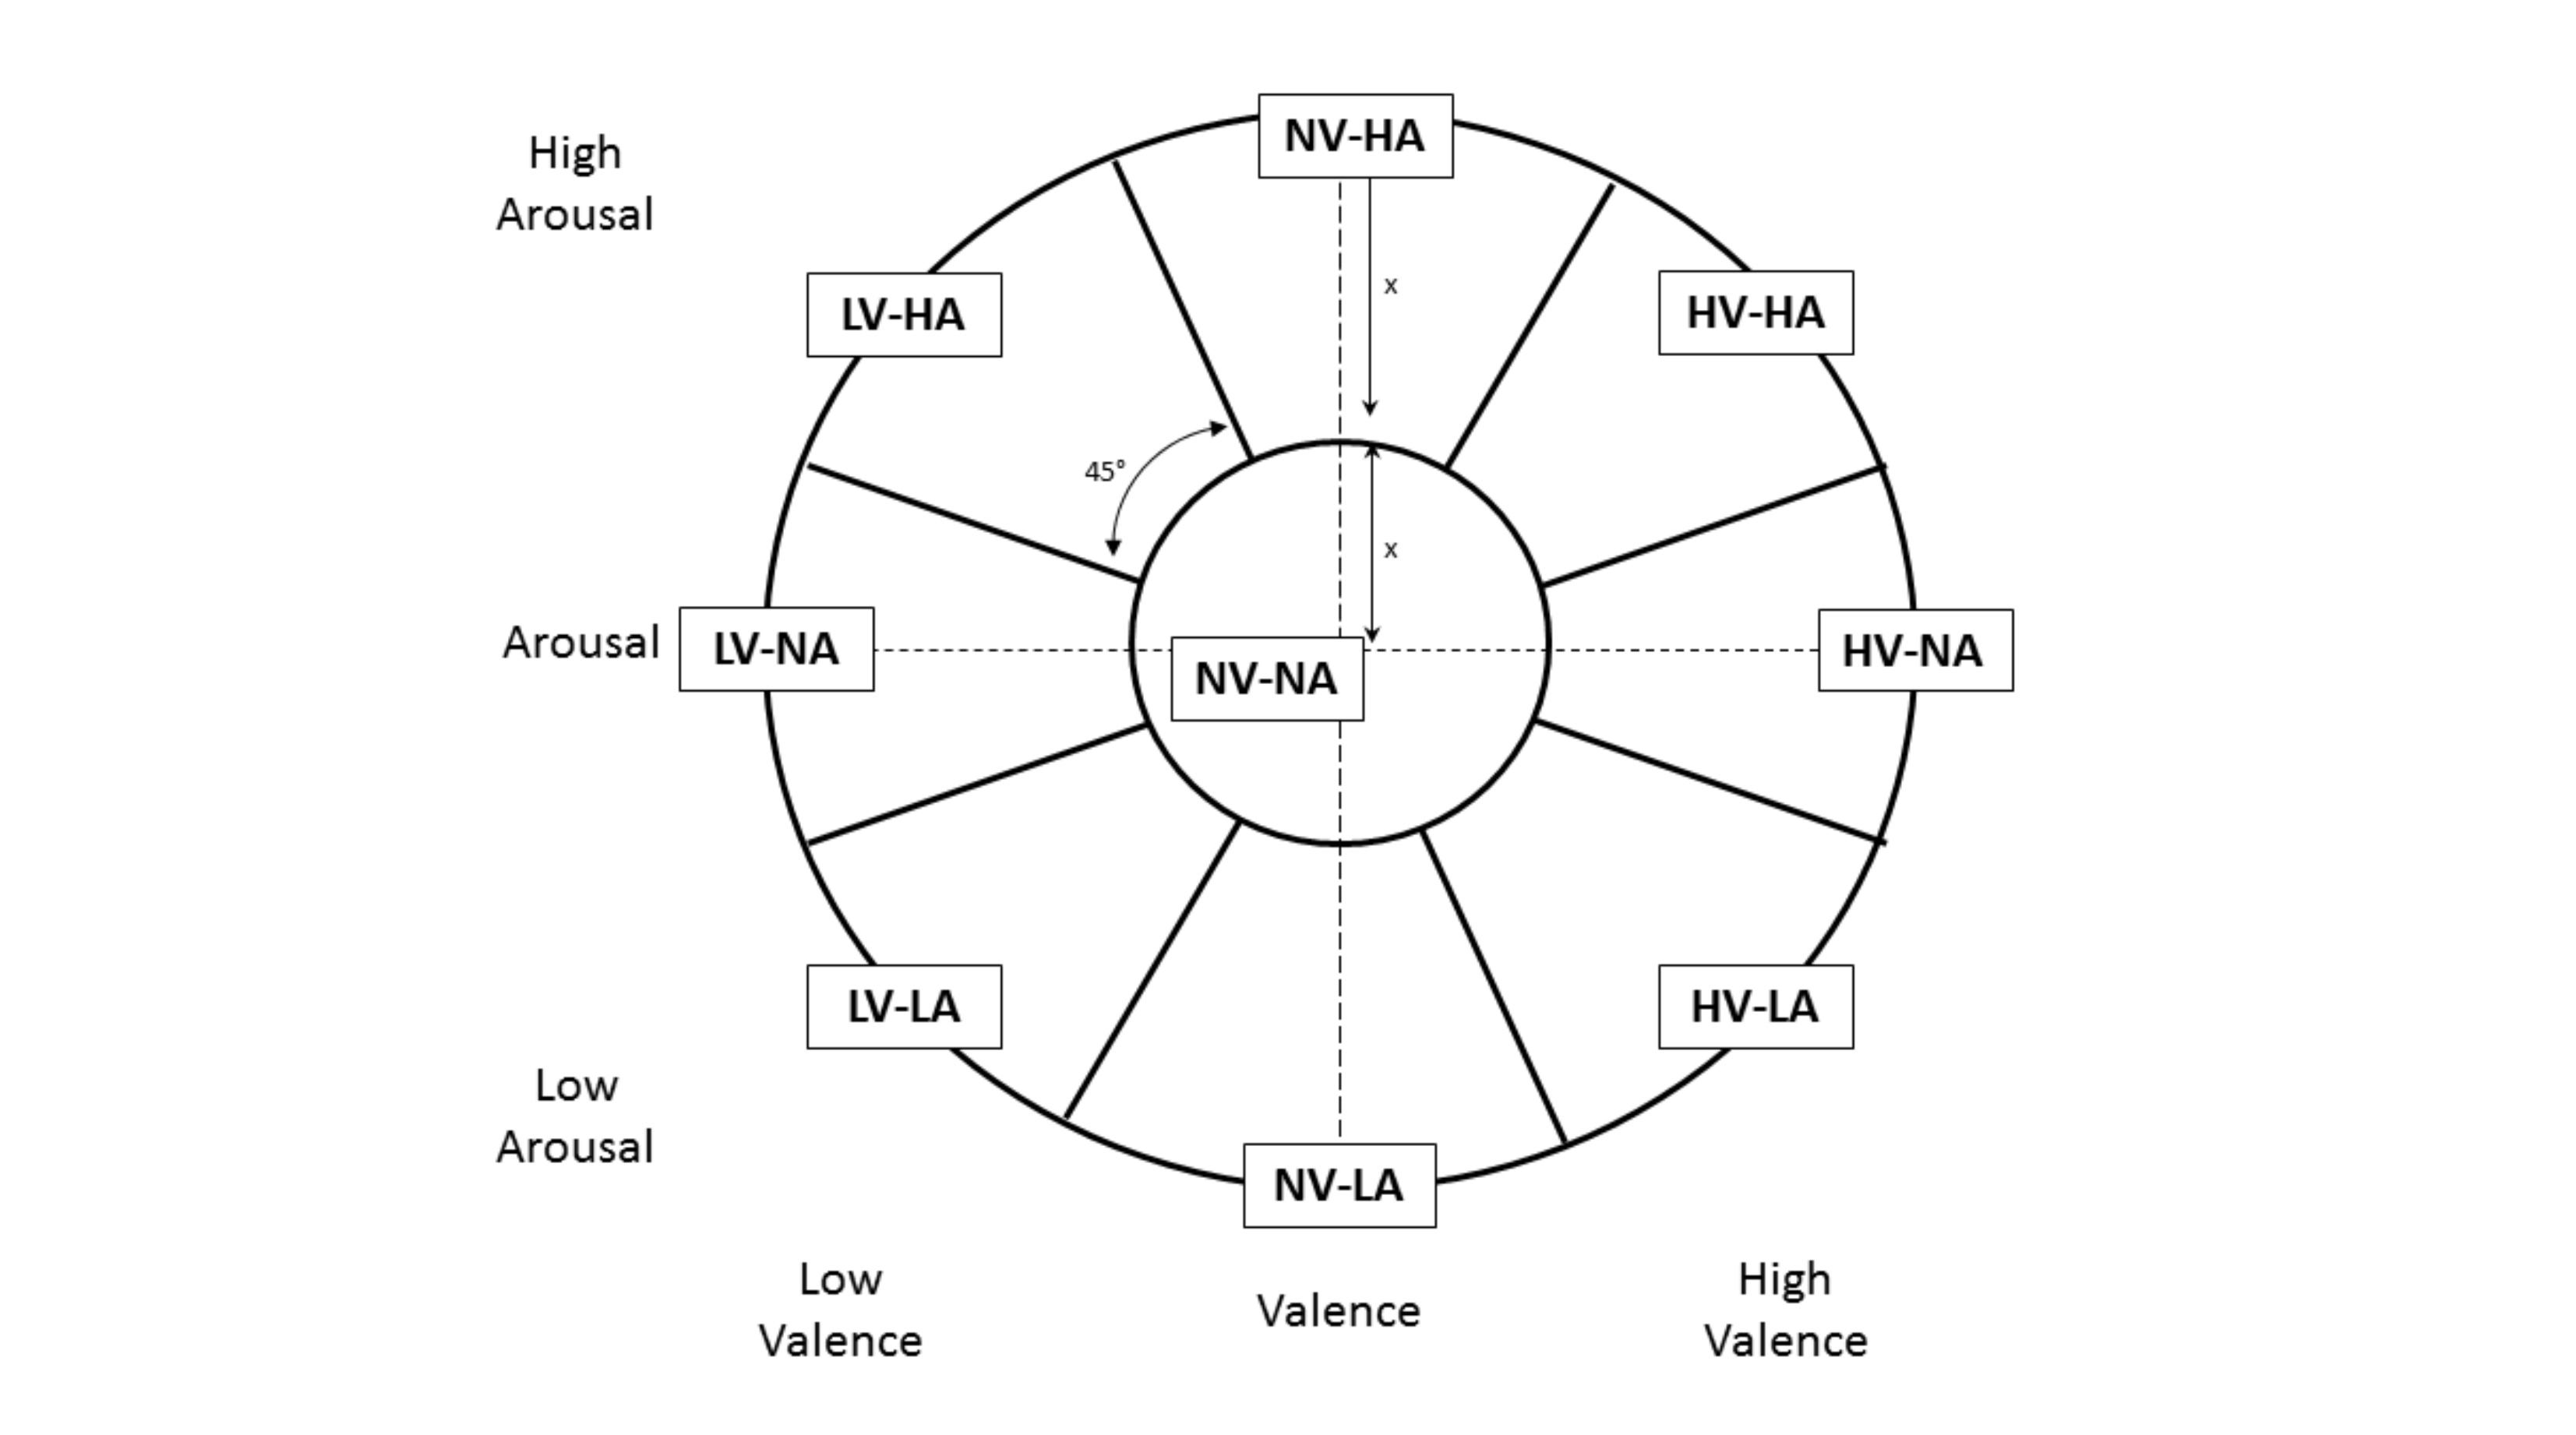 'The segmentation of the FEELTRACE response space into discrete regions. Regions are labelled as low (L), neutral (N), and high (H) arousal (A), or valence (V)' [@DalyEtal2015IdentifyingAffectedStatesForBCMI]. Image courtesy of Daly and Williams.